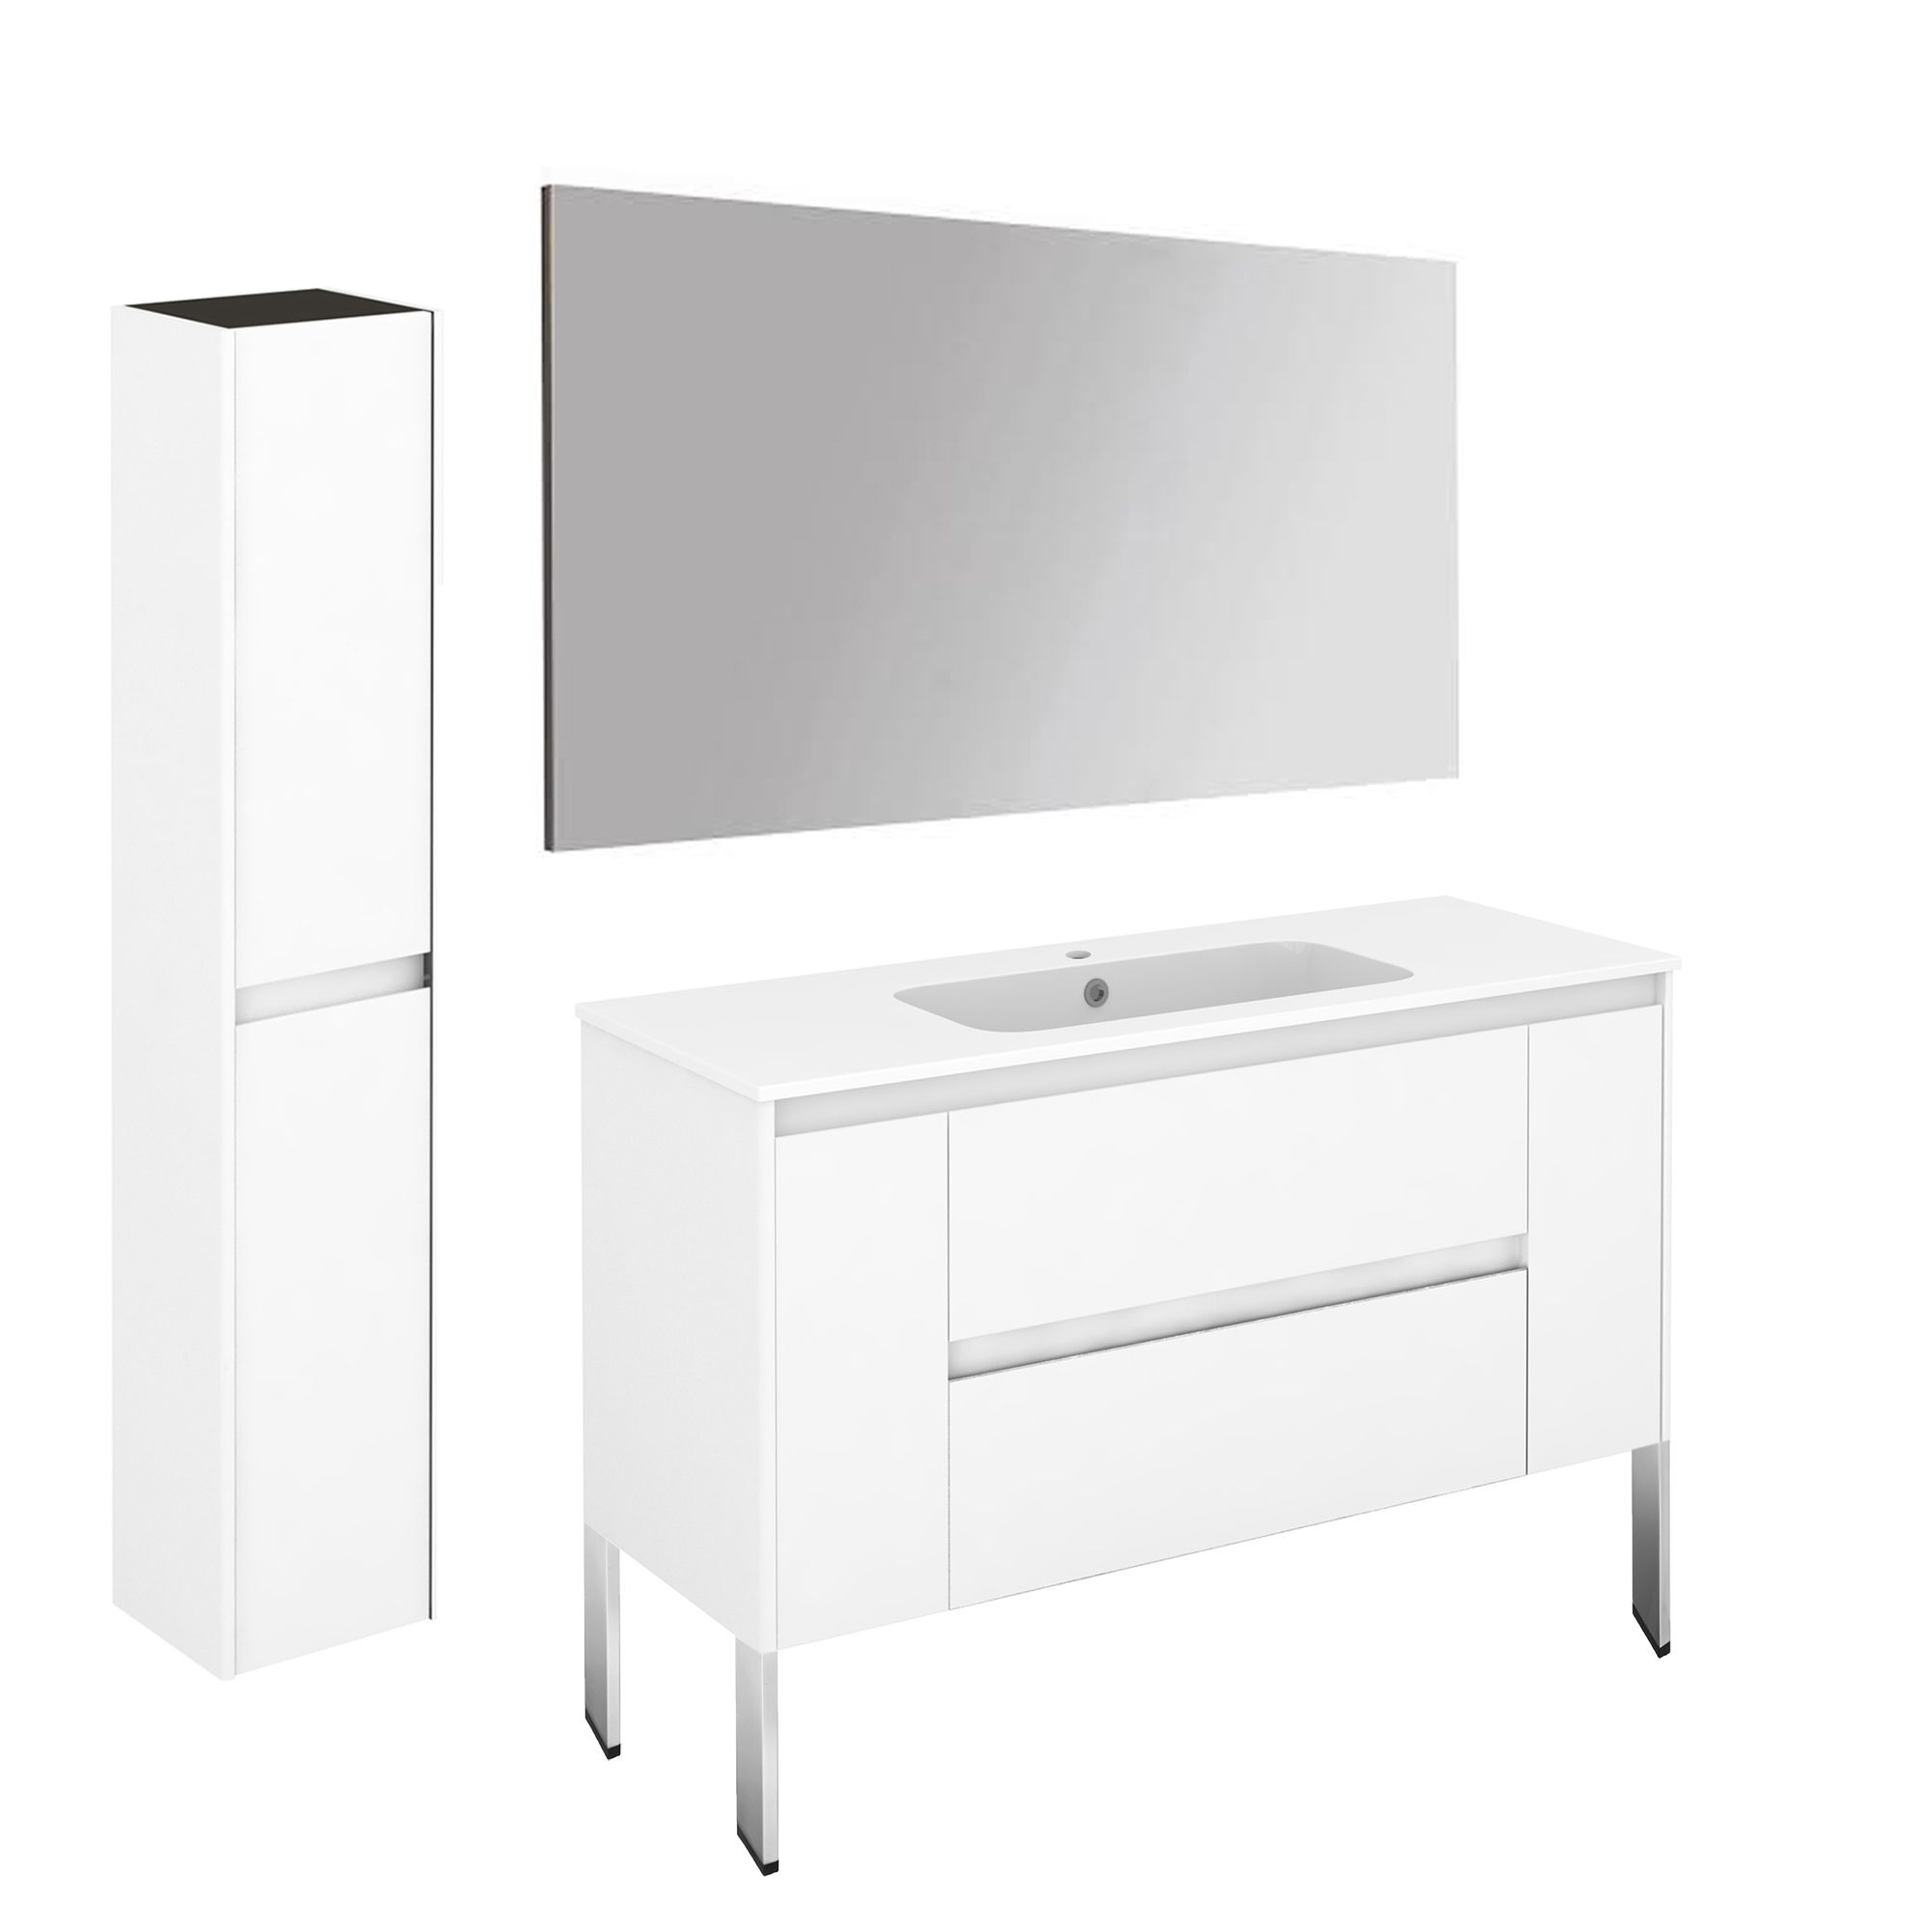 Deciding Between a Drawer Unit Under Your Sink or a Drawered Bathroom Vanity